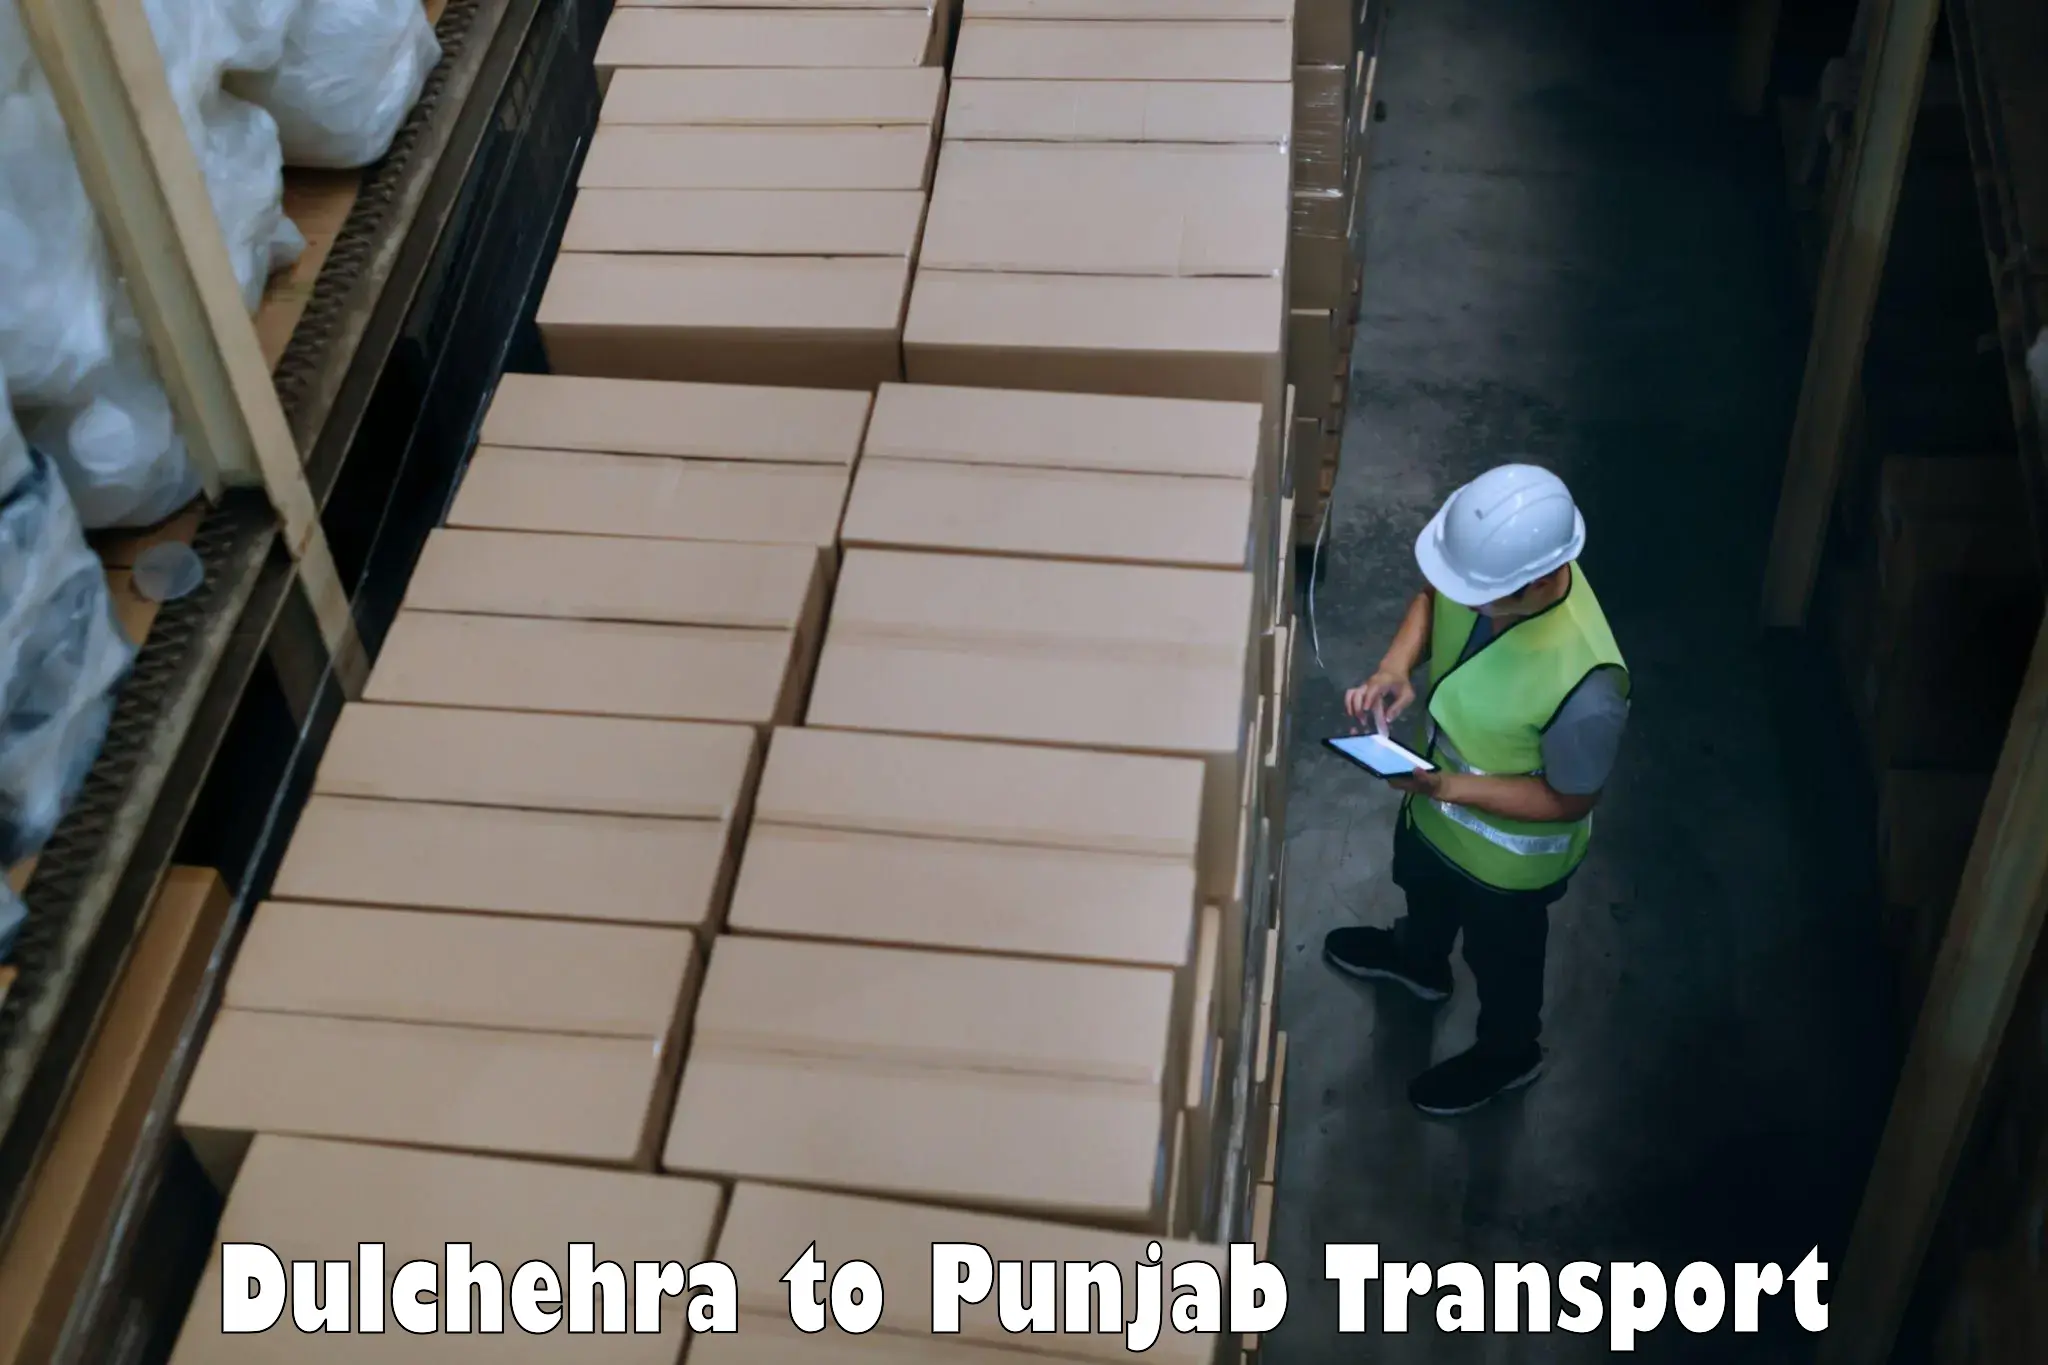 Vehicle transport services in Dulchehra to Nangal